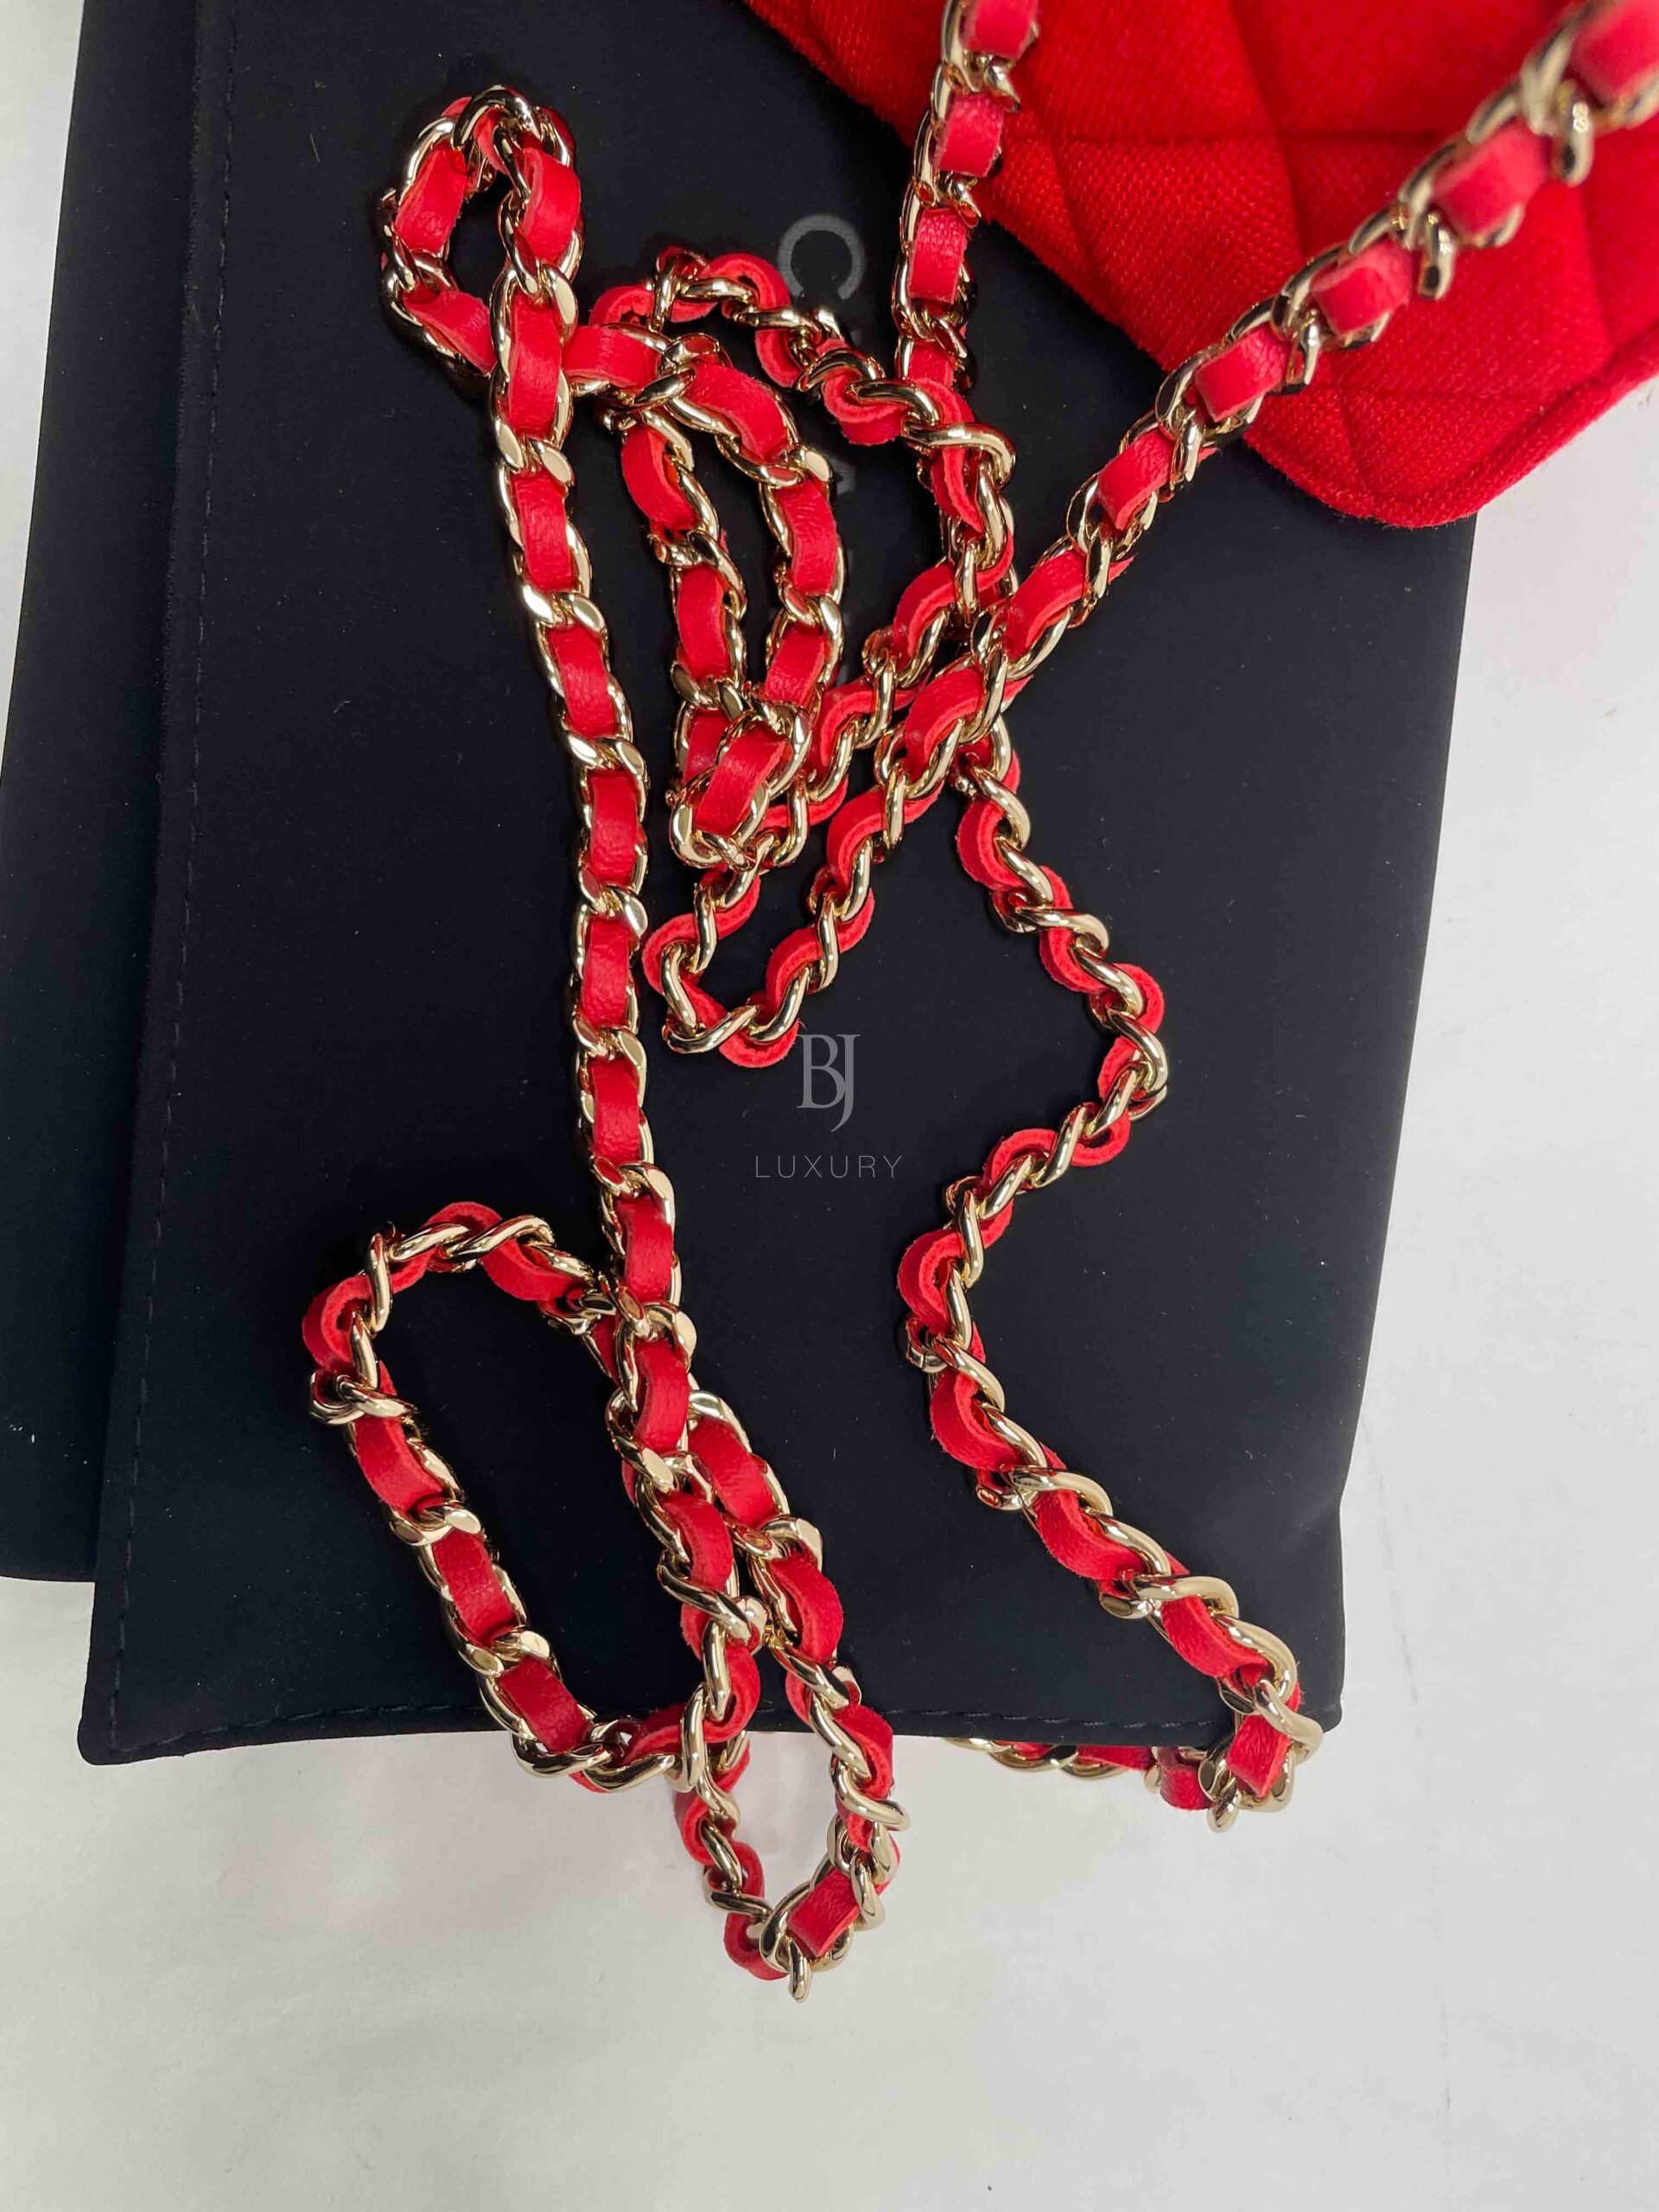 CHANEL-CLUTCHWITHCHAIN-MICROMINI-RED-JERSEY-Photo 14-2-23, 18 40 23.jpg